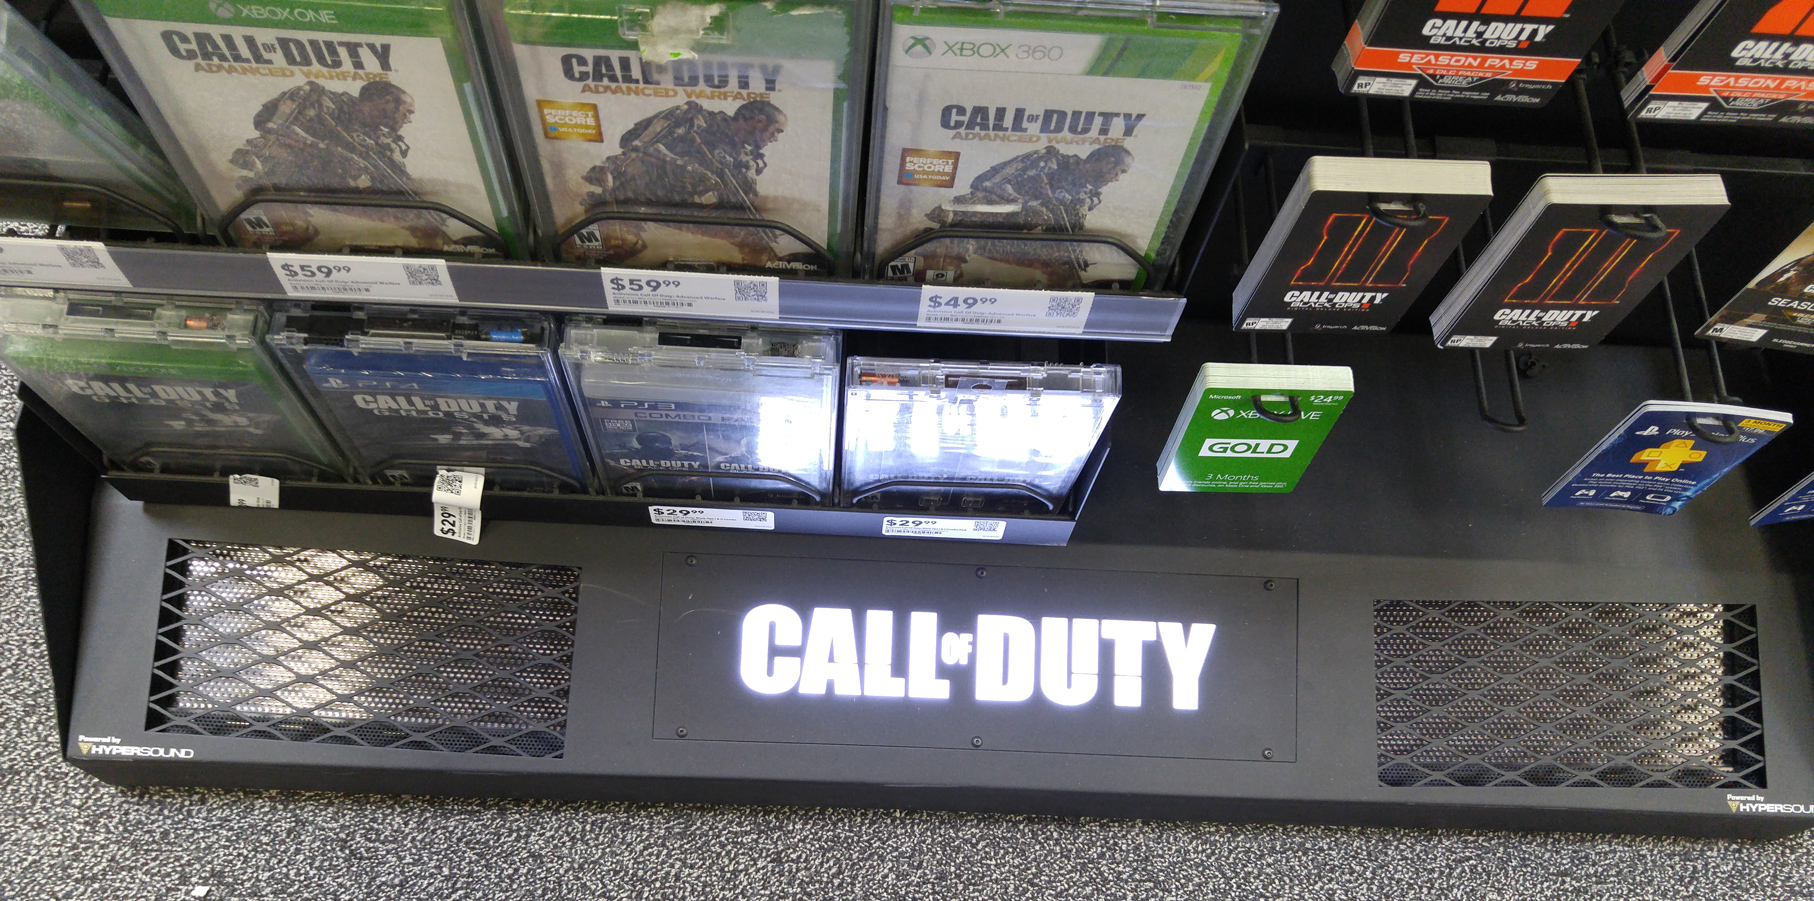 HyperSound Call of Duty Best Buy kiosk close